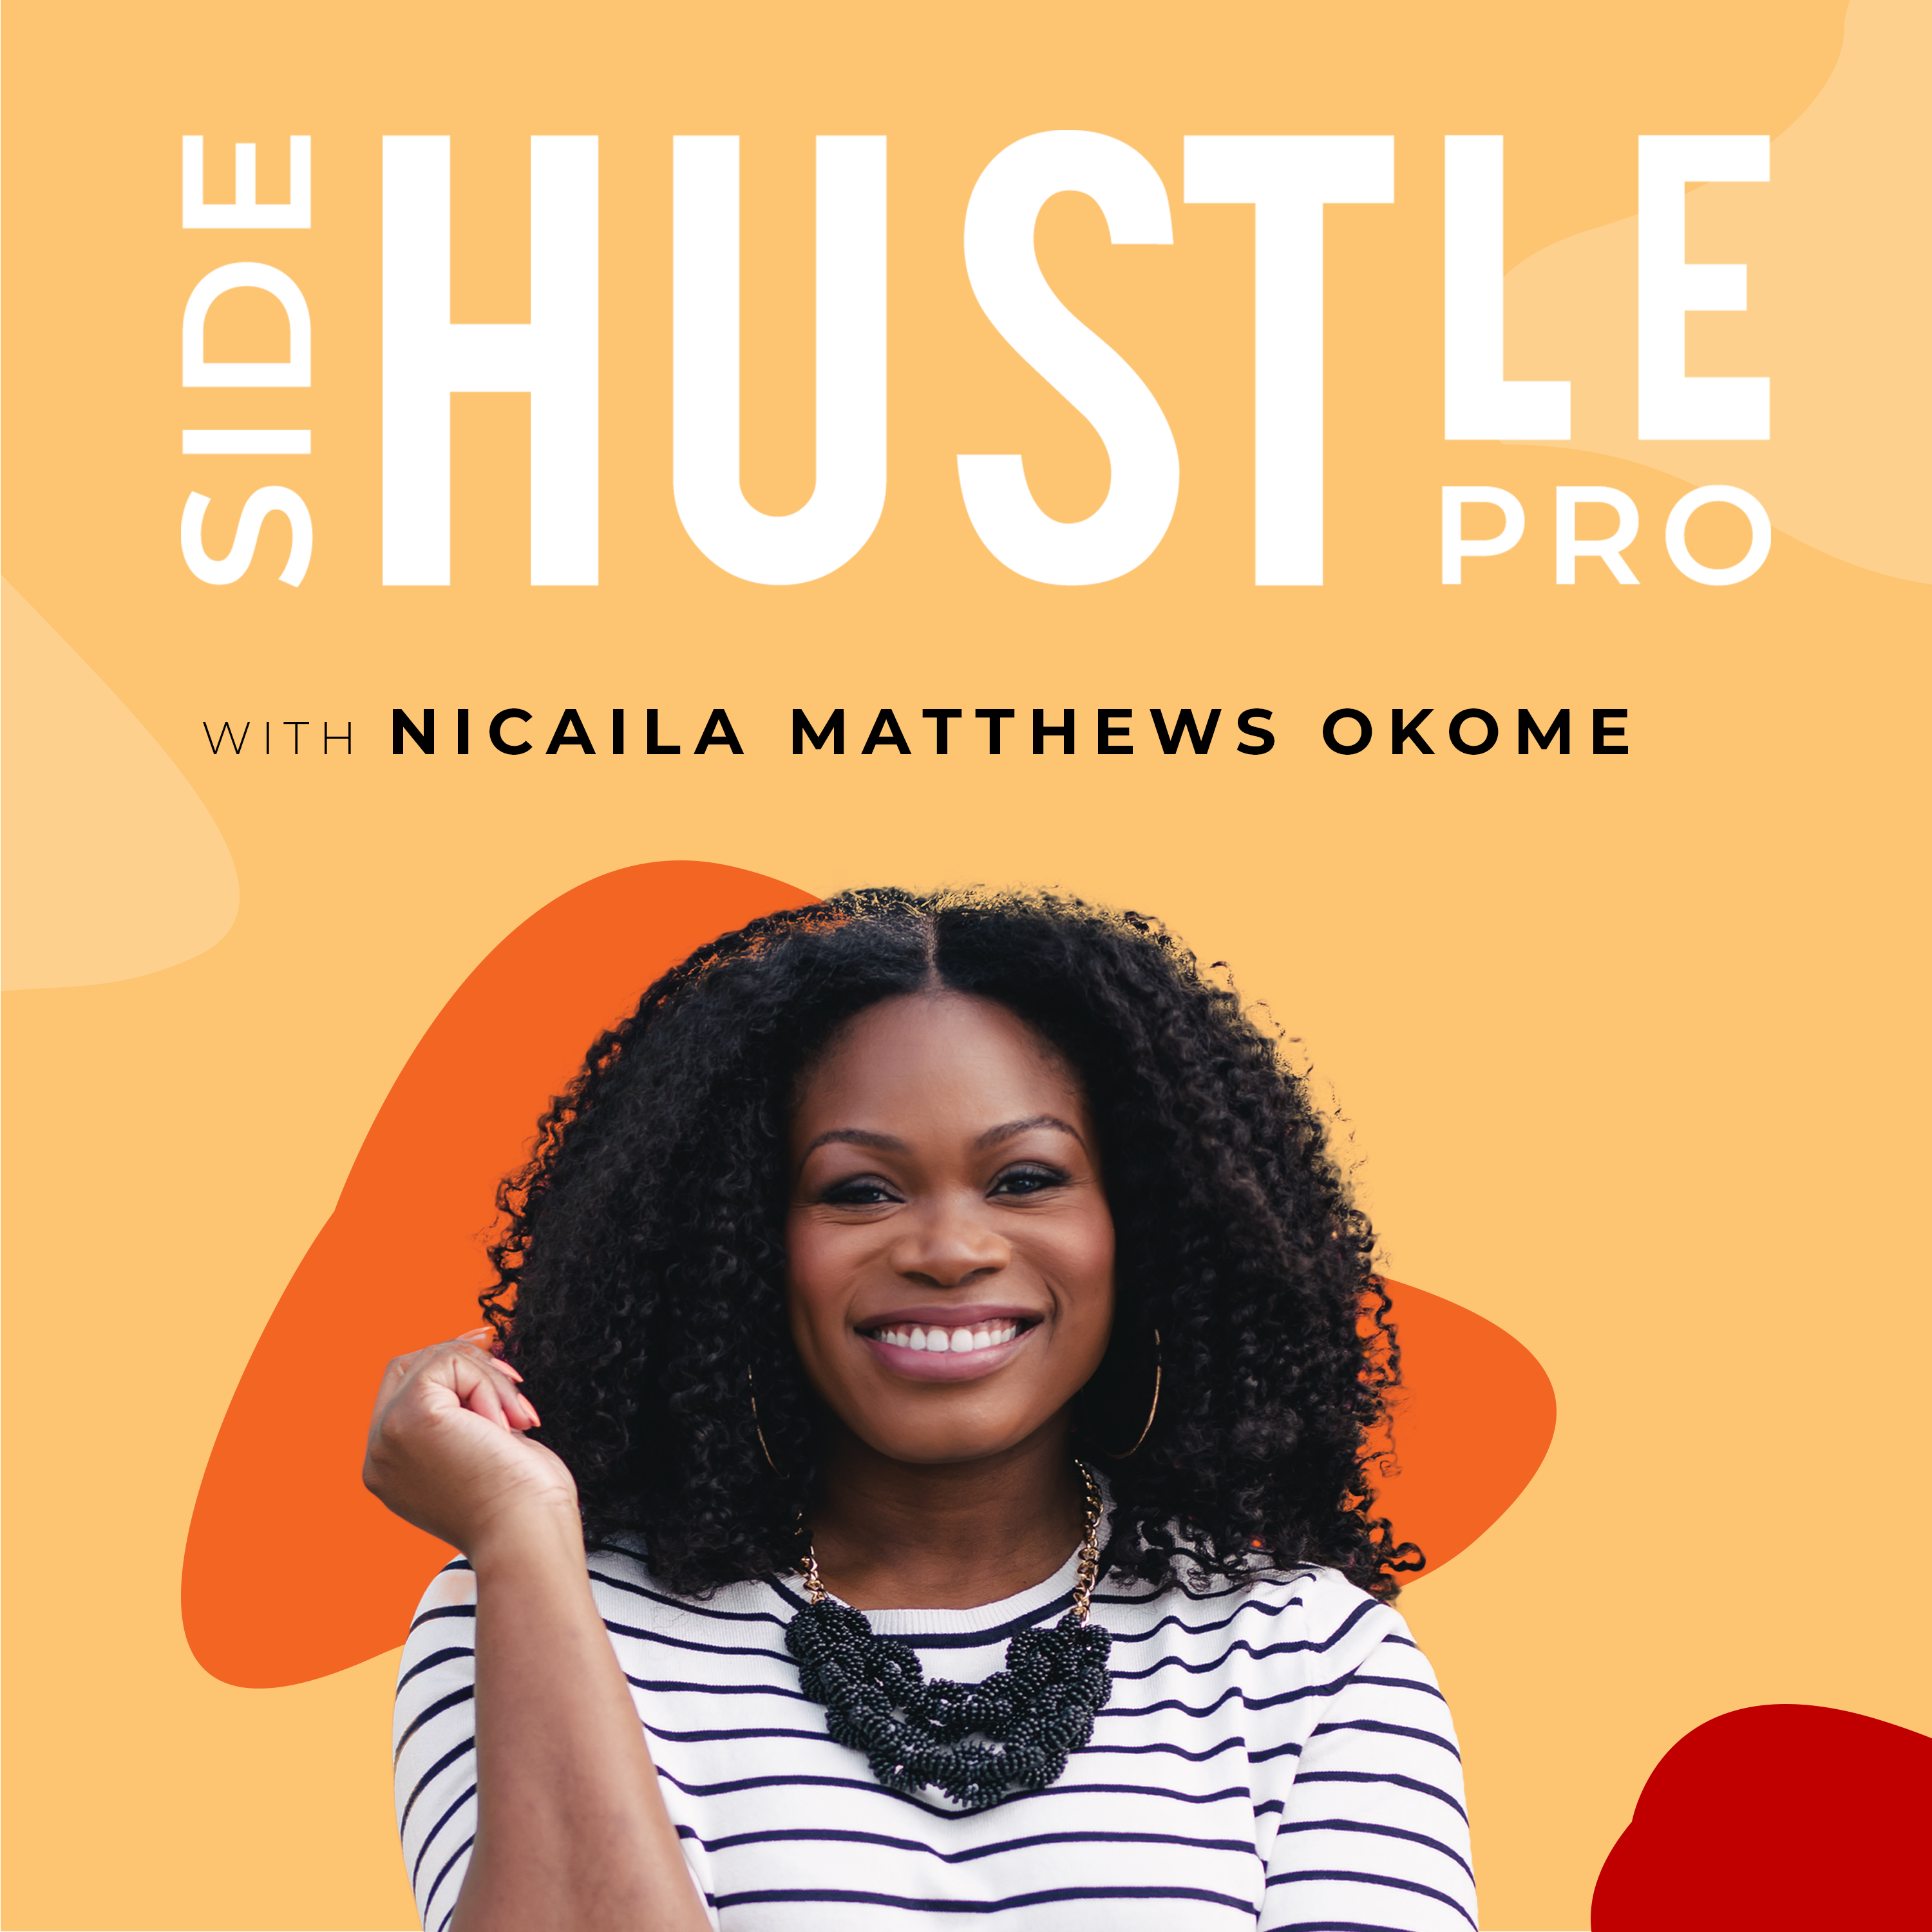 293: How Ericka Chambers is Building Her Brand, Puzzles of Color, While Working Full Time